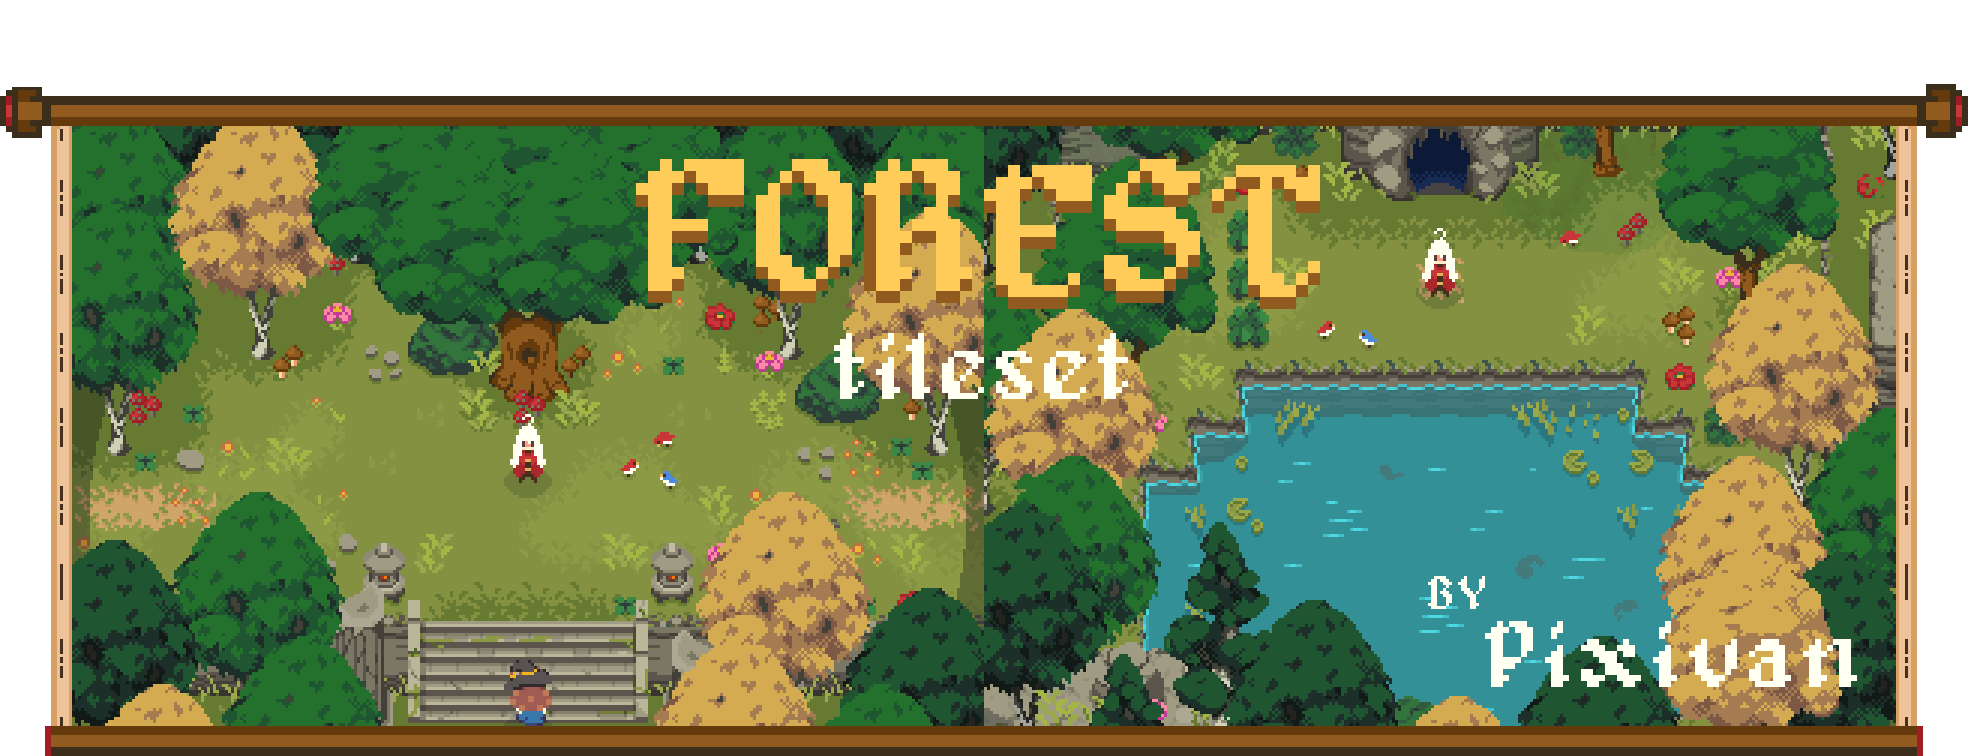 Top Down Forest Tileset